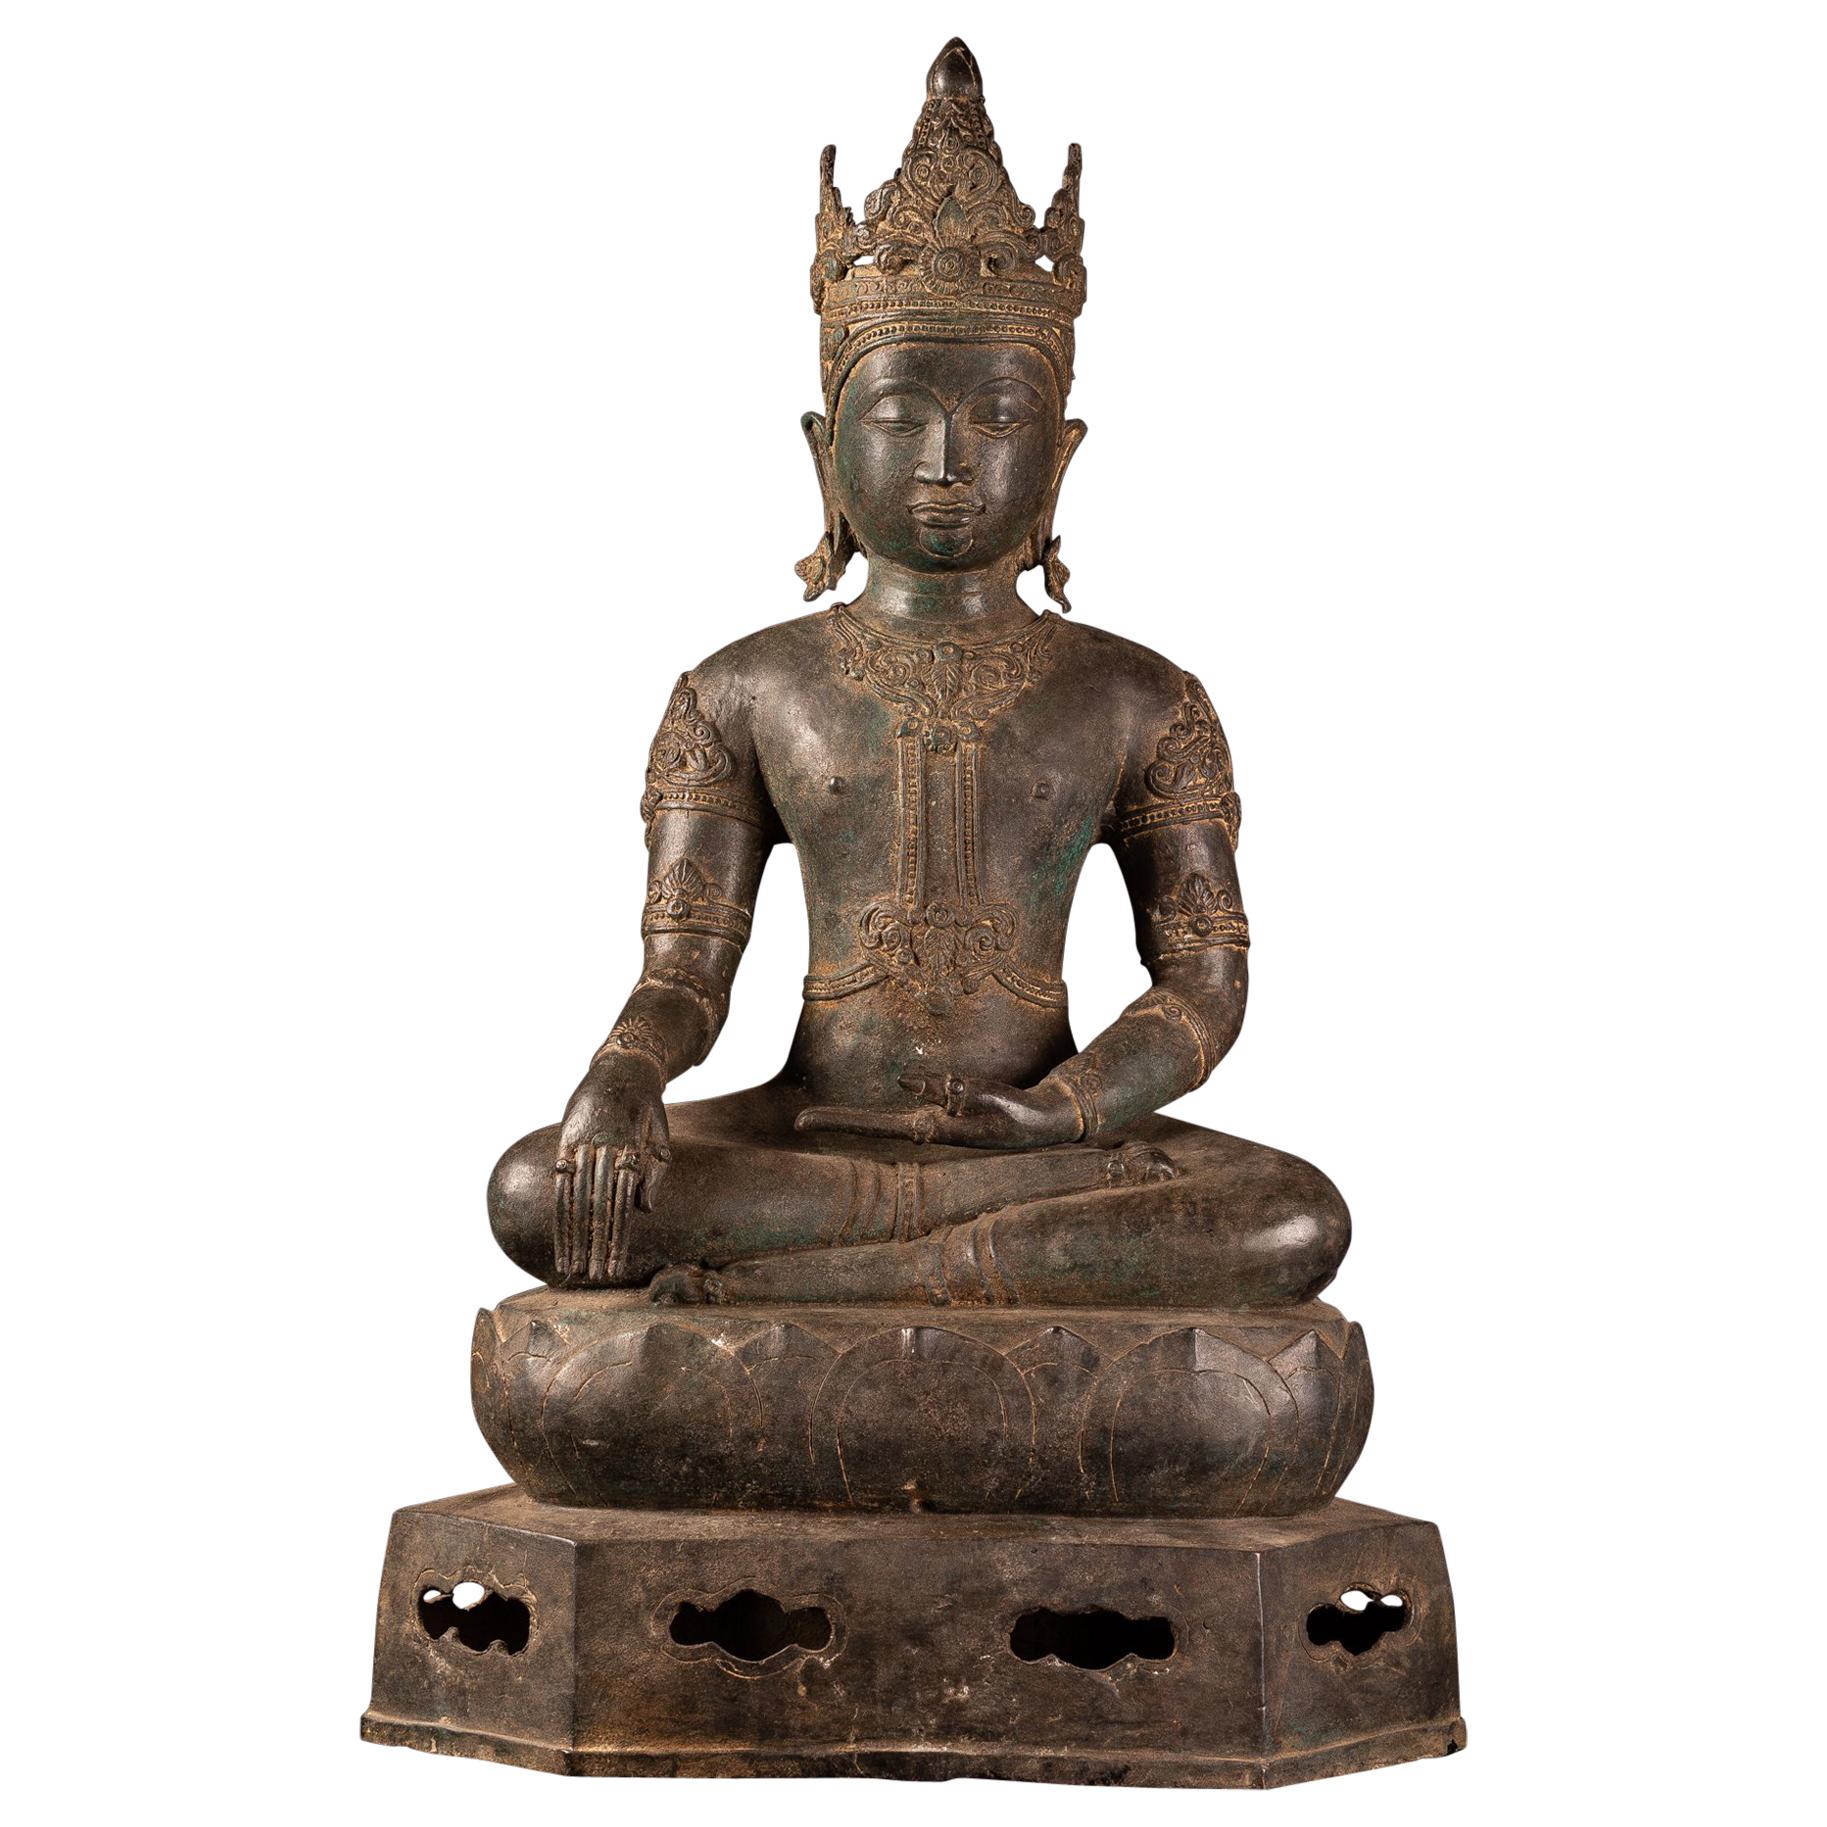 Royal Antique Bronze Buddha with Imperial Attire, Fine Details, 18th Century